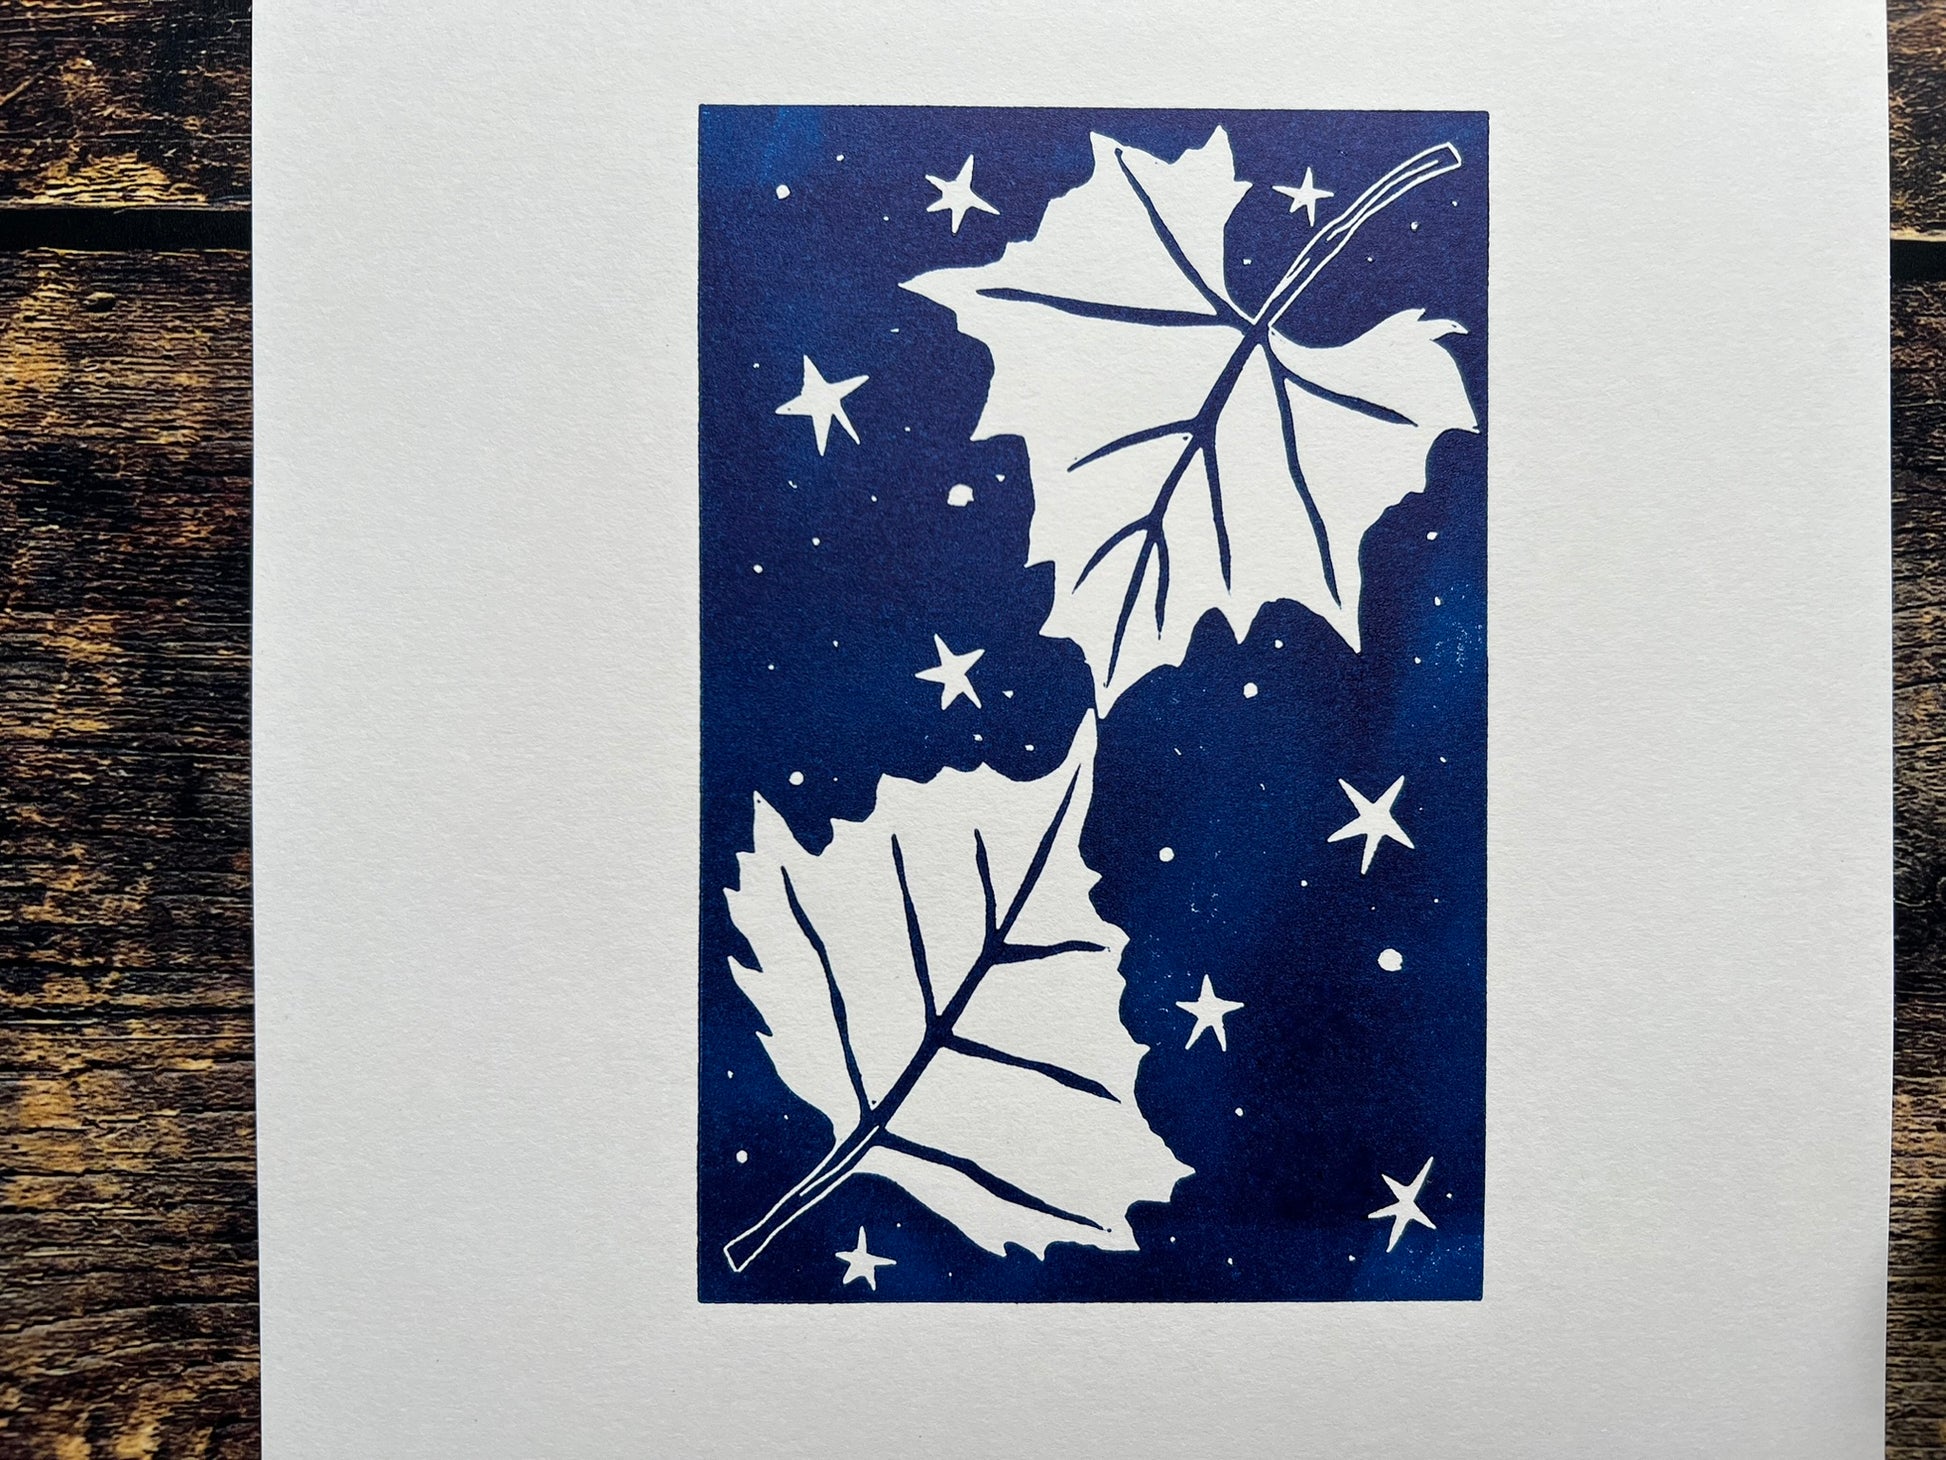 A close up of the sycamore lino print